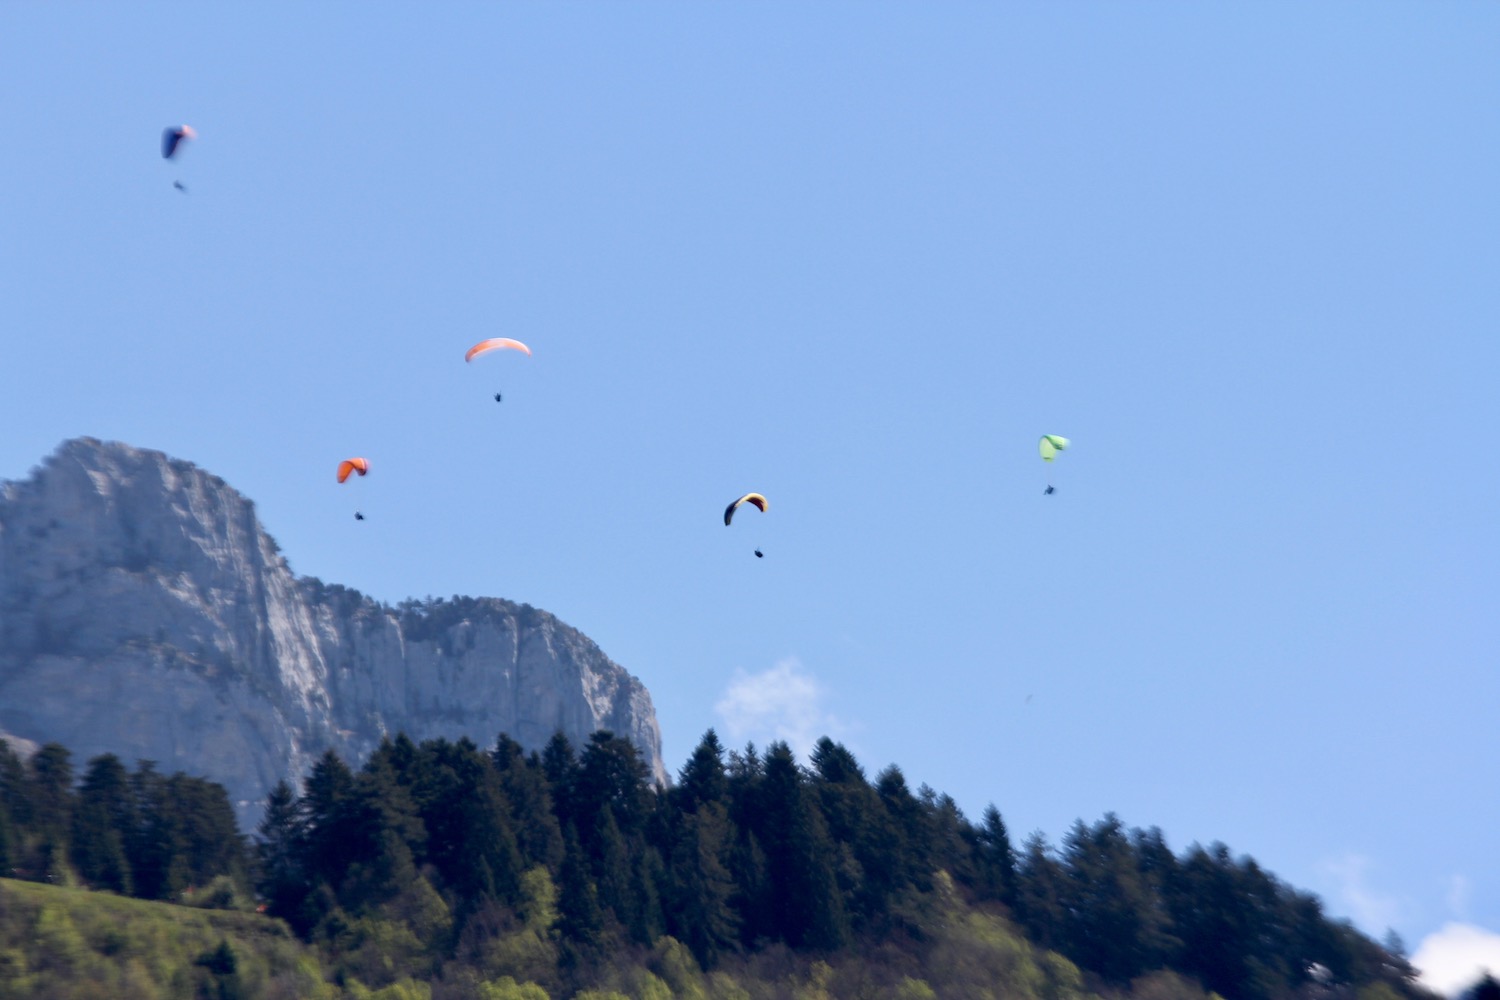 Watch paragliding from back deck